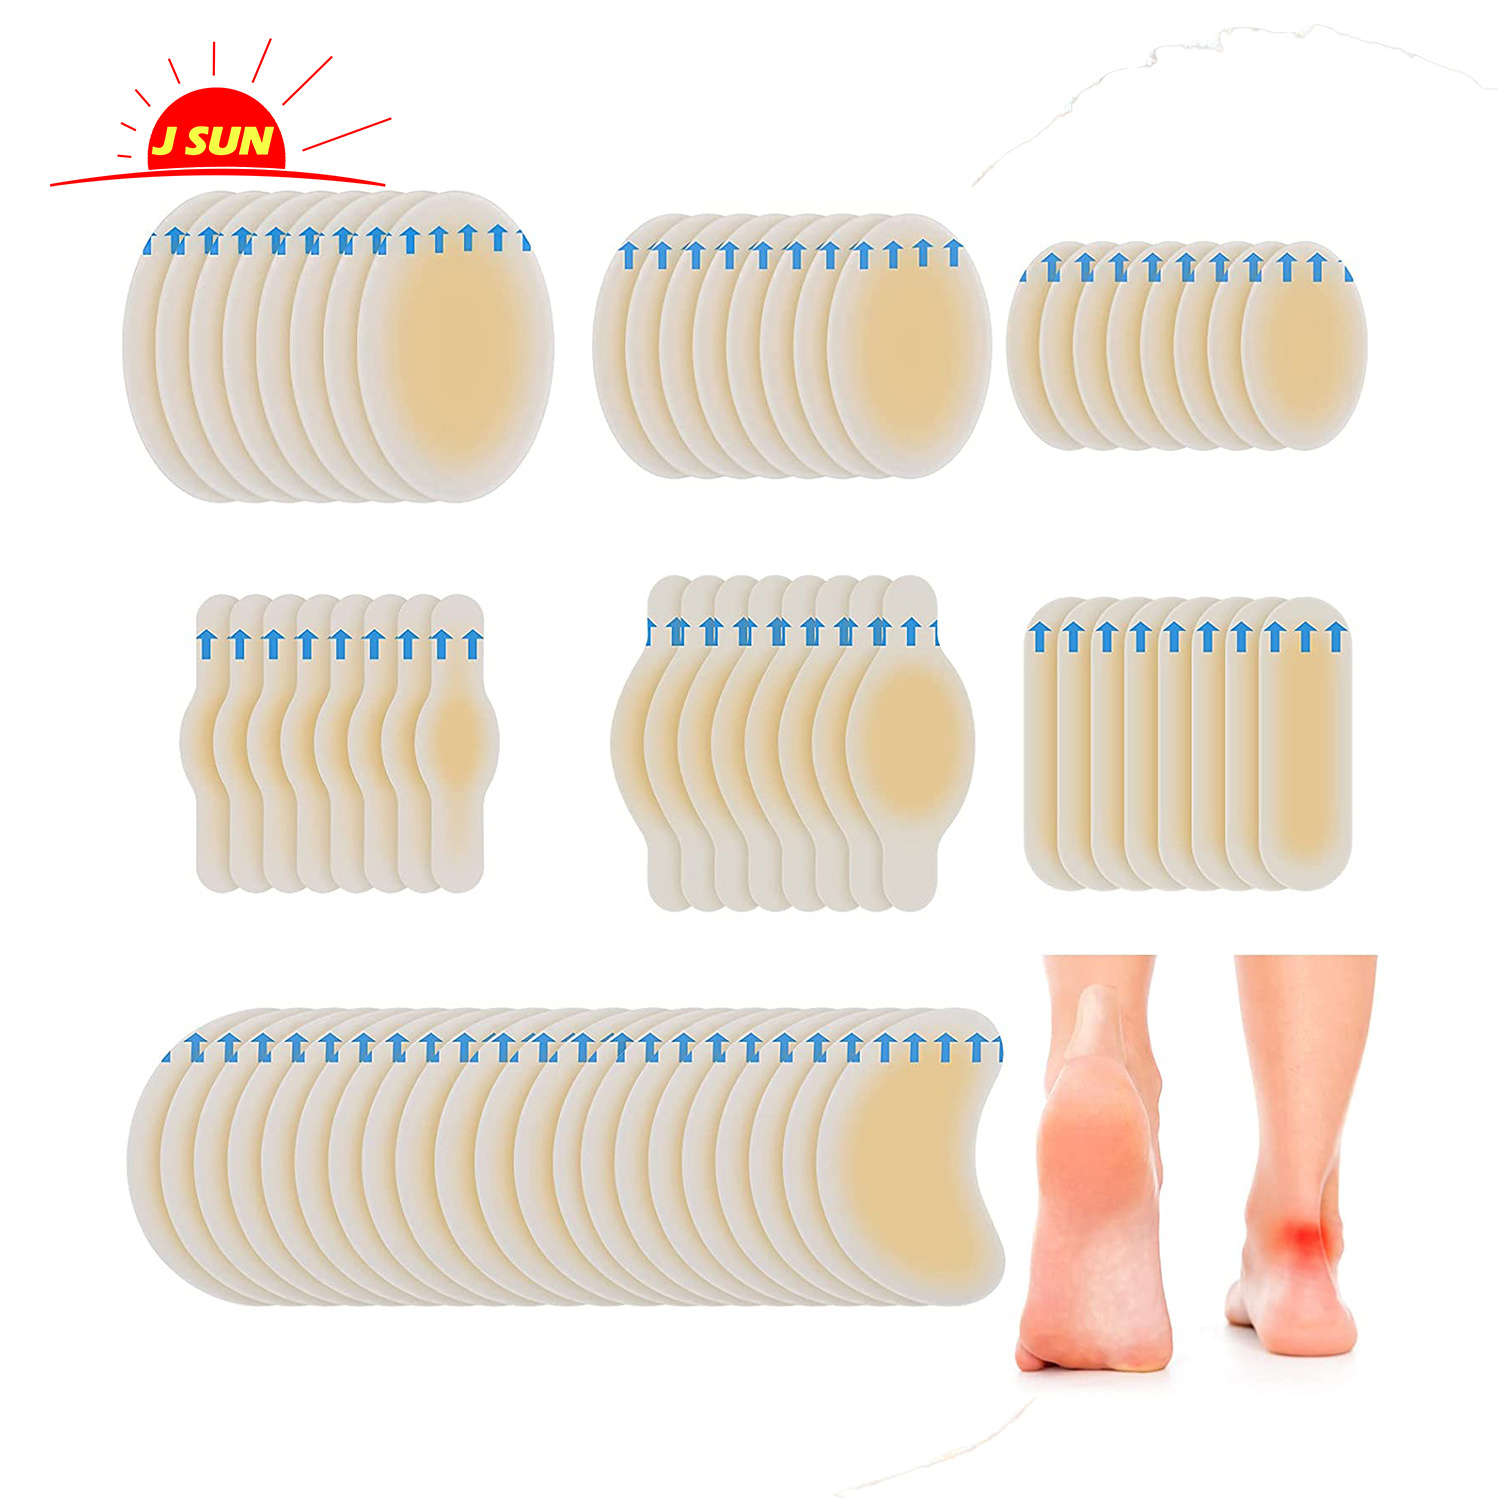 Best-selling product  Hydrocolloid foot patch